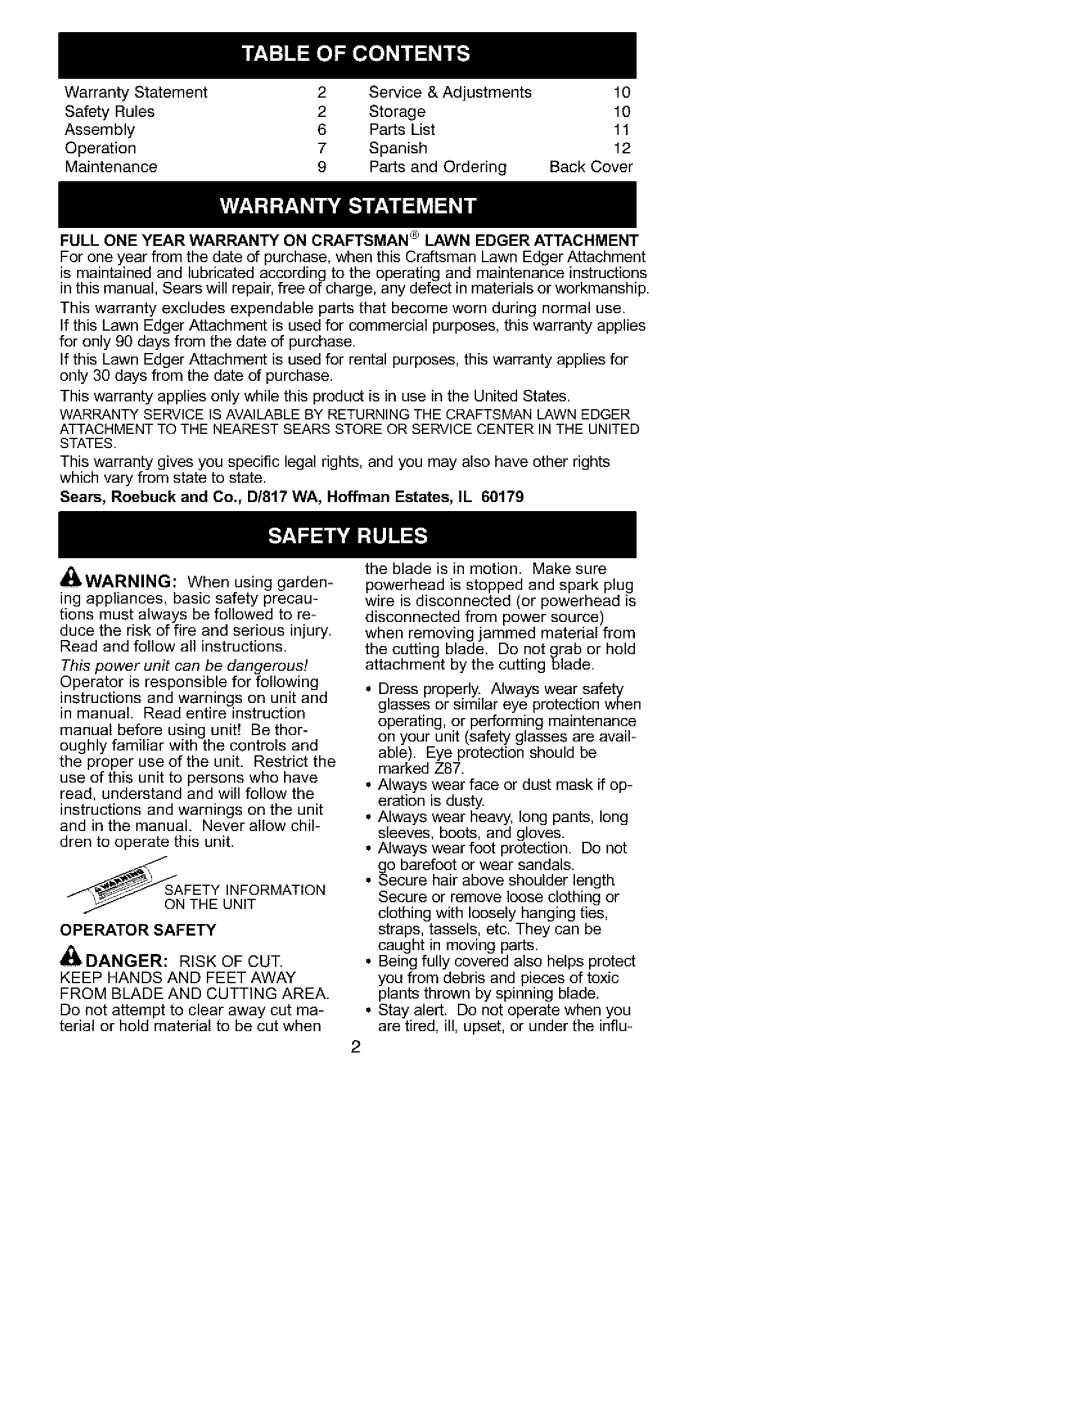 Univex 358.792400 instruction manual This power unit can be dangeroust, Operator Safety 